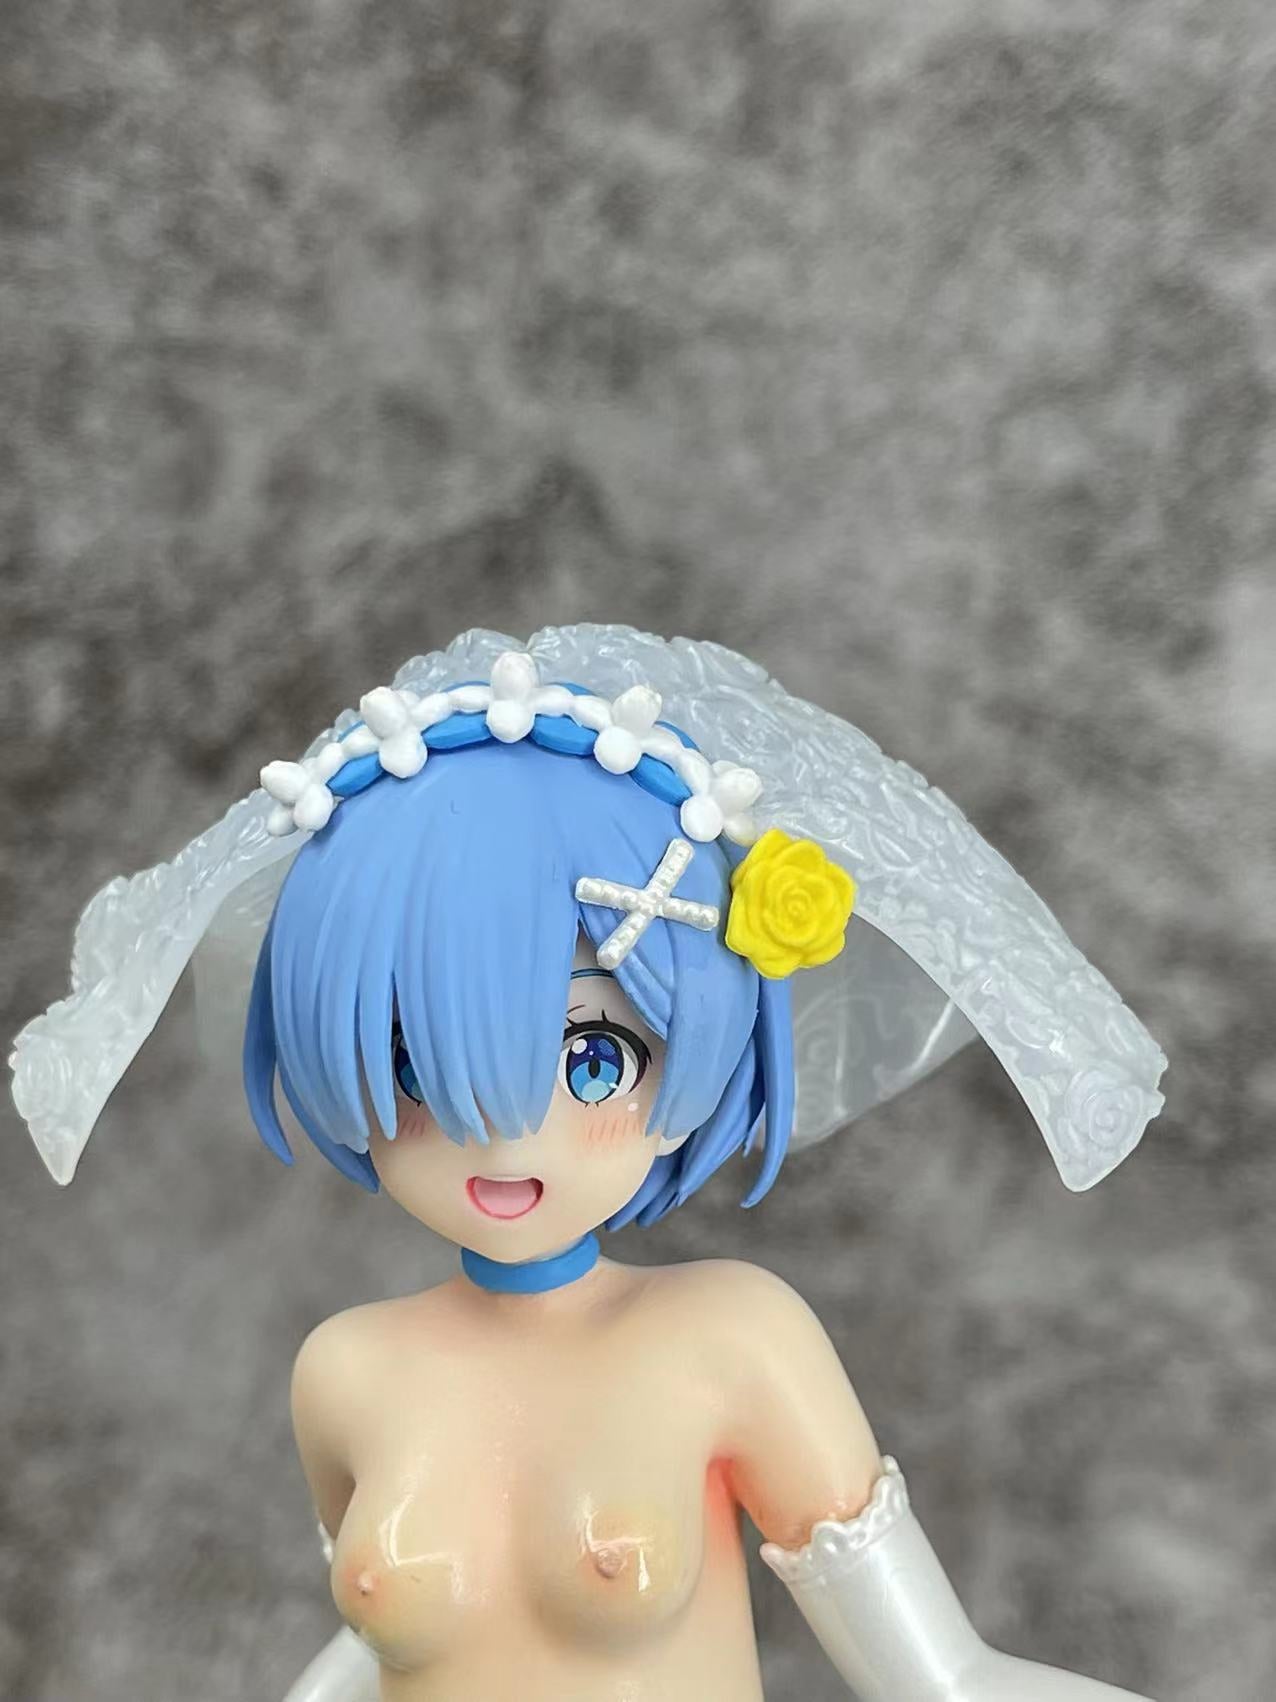 Starting Life in Another World: Rem 1/6 anime girl figure naked anime figures